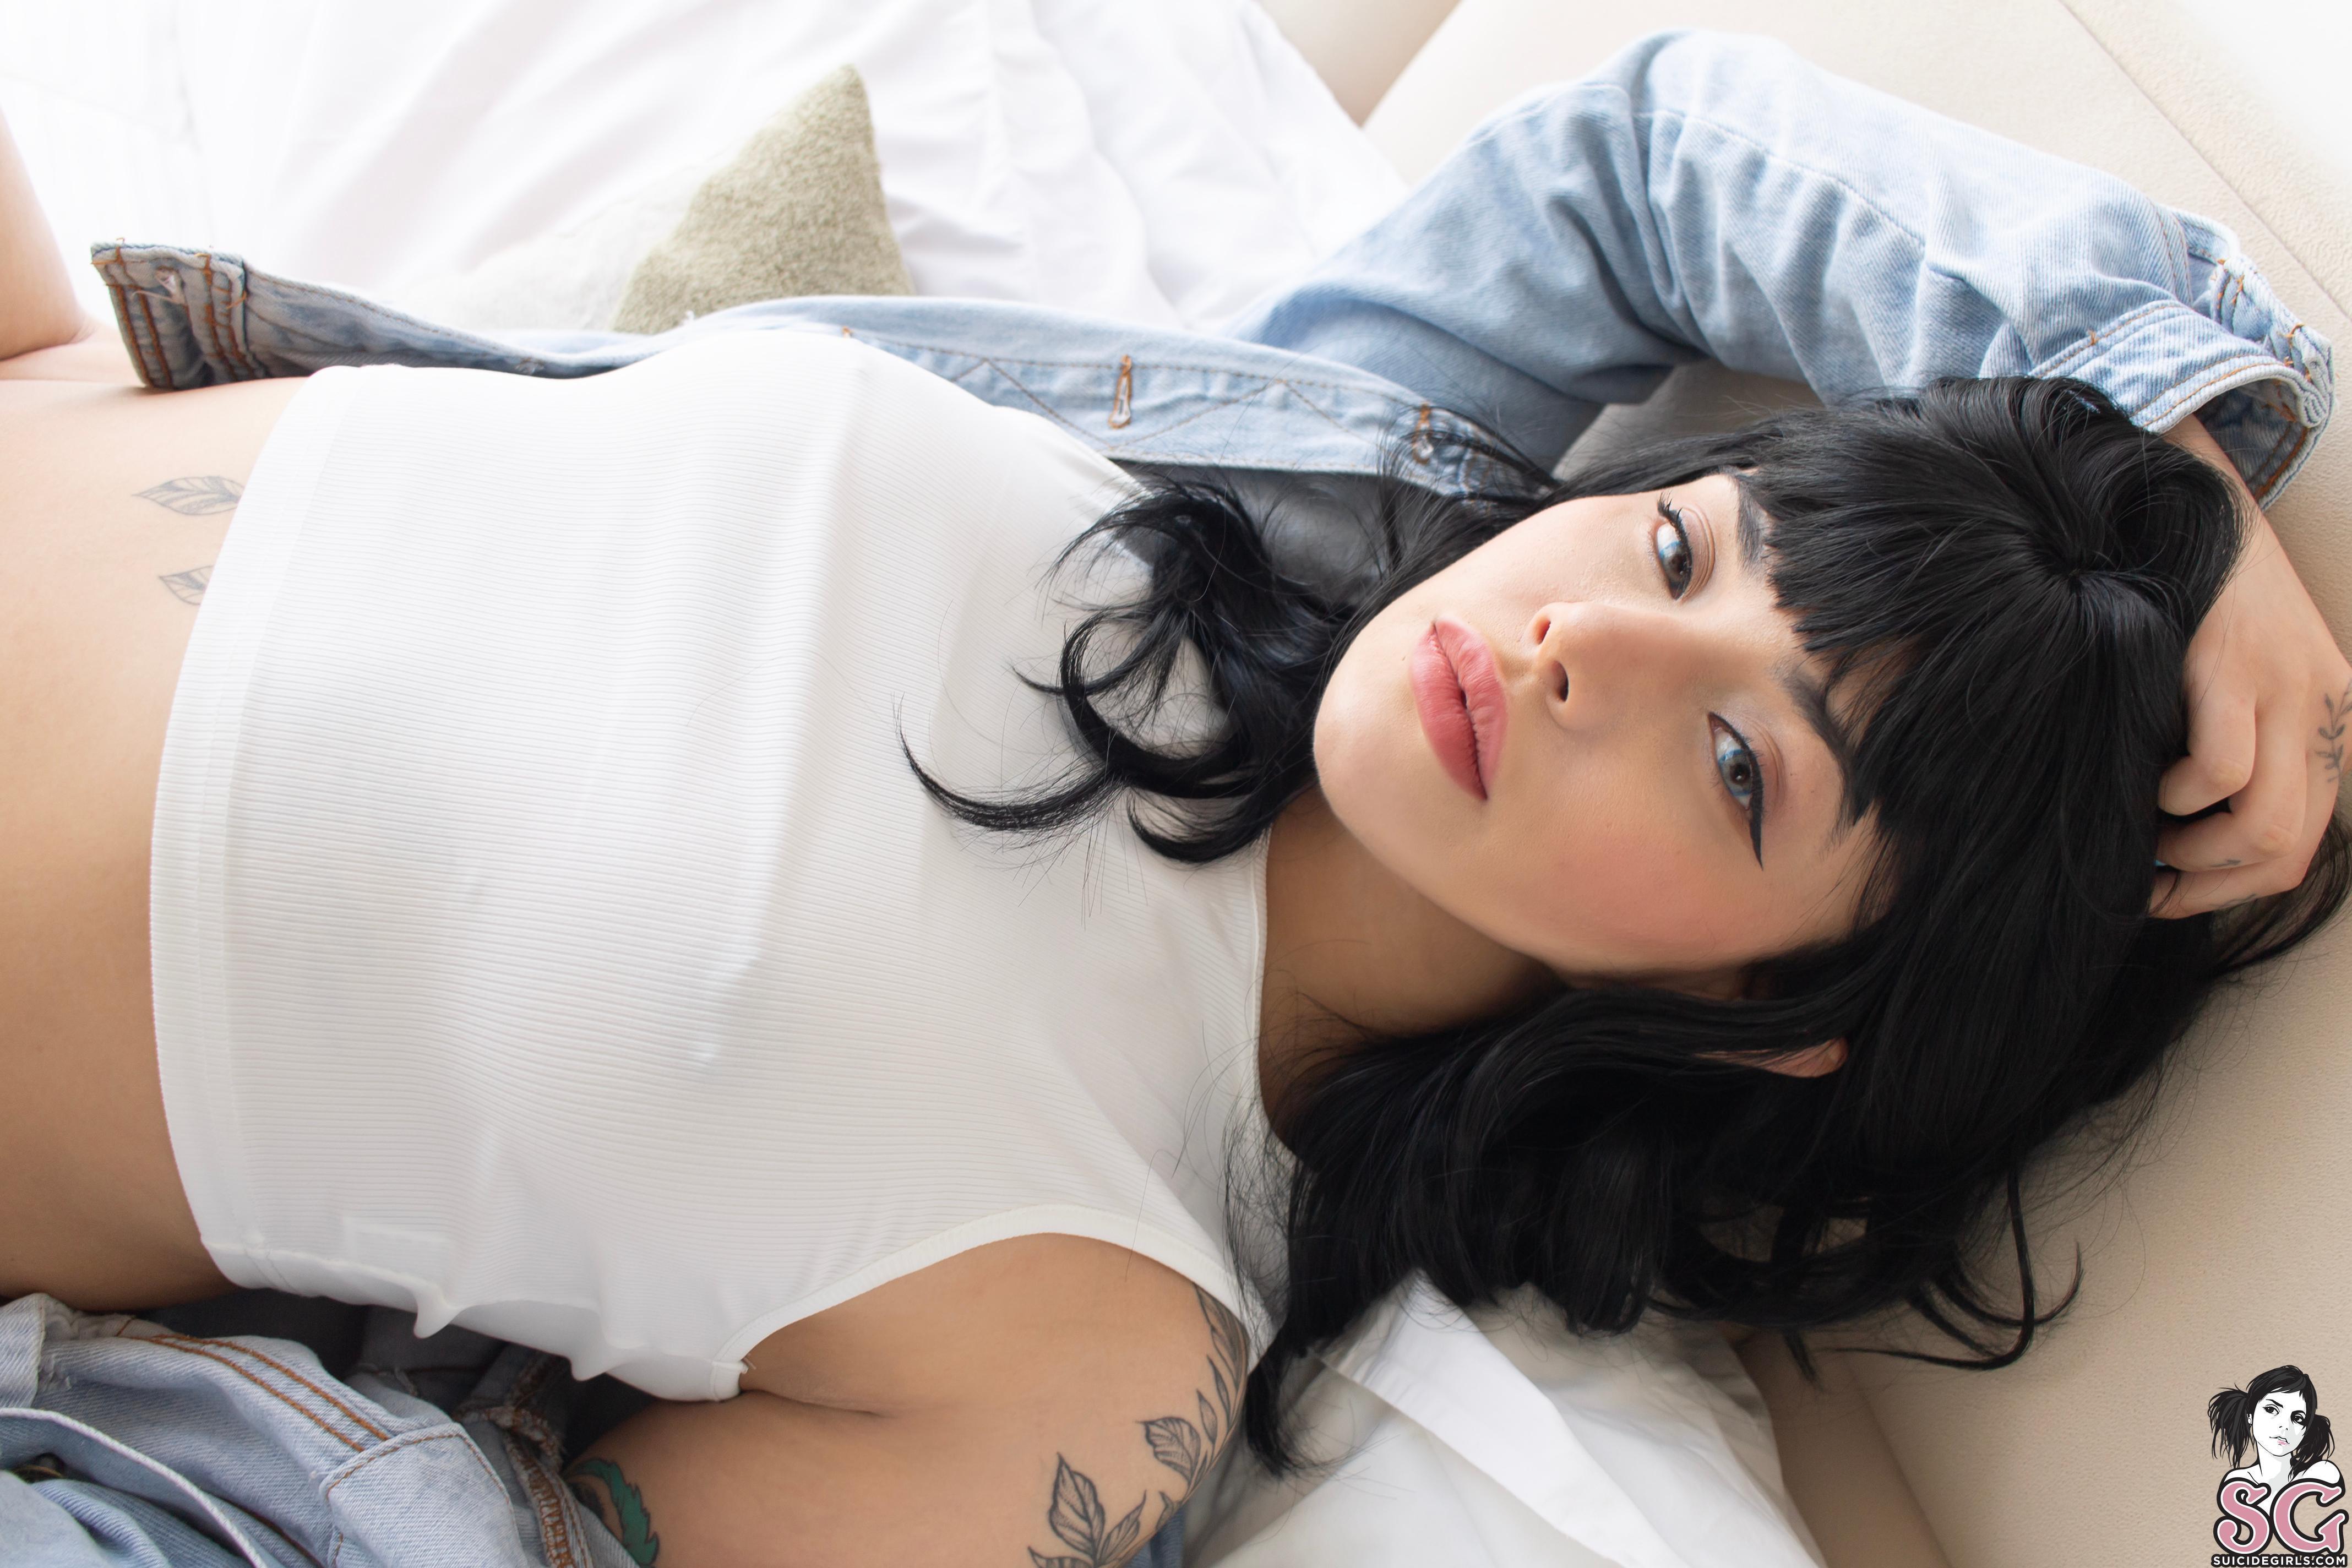 Anybloom Suicide, Morning Reading